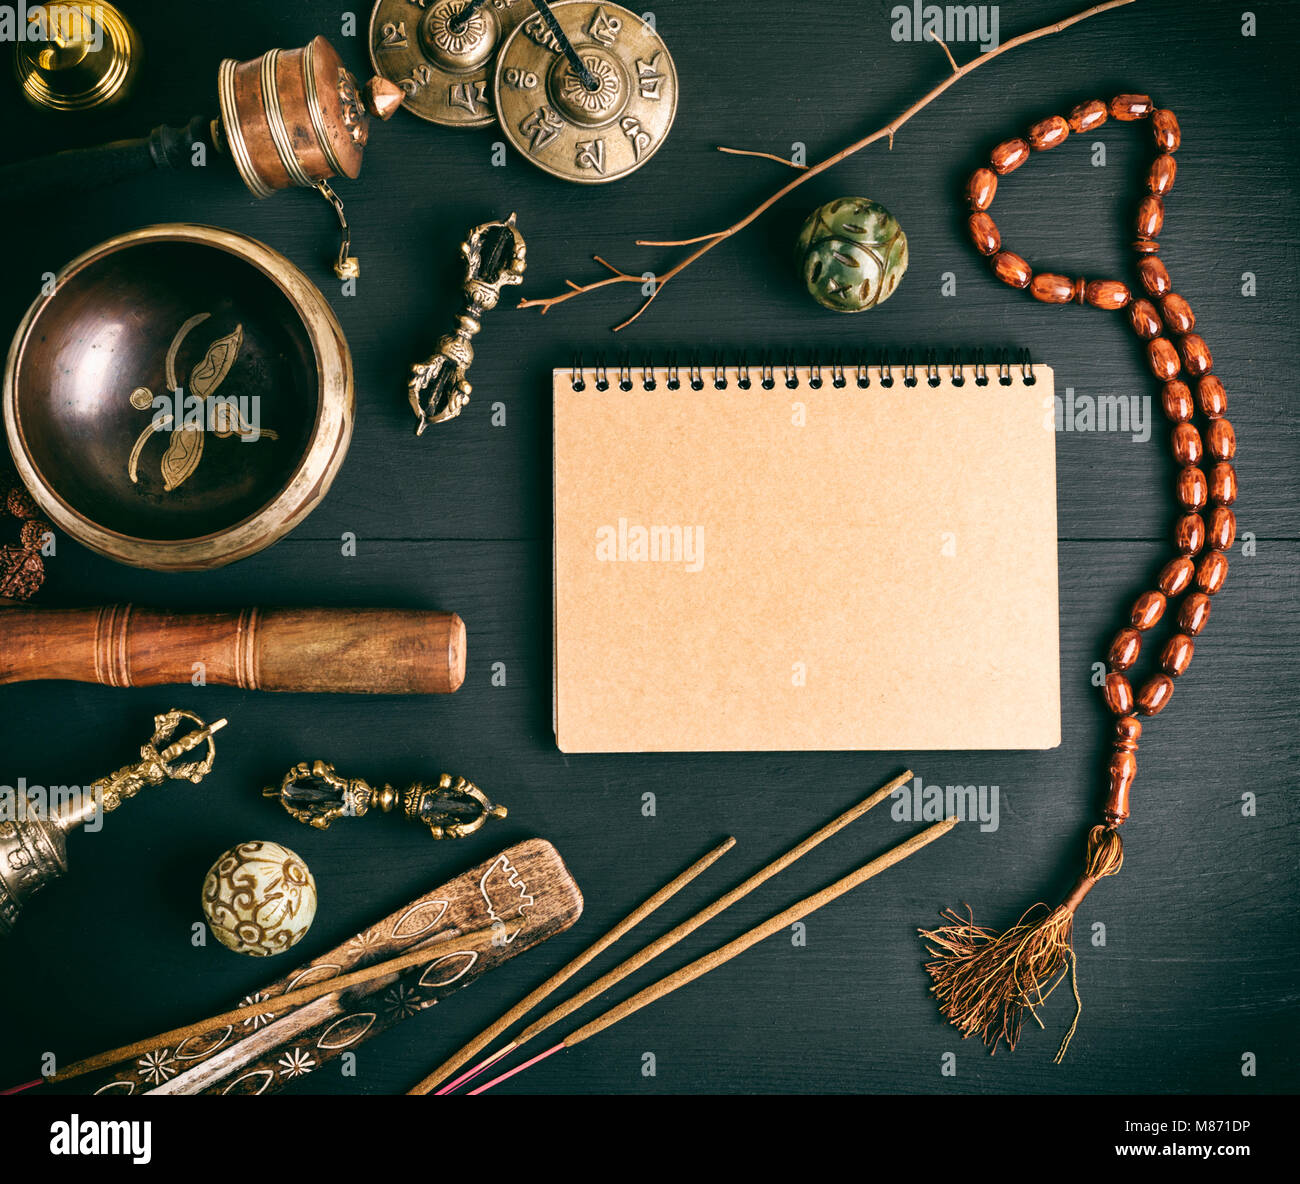 Asian religious musical instruments for meditation and alternative medicine, blank notebook with brown sheets on a black wooden background, top view Stock Photo